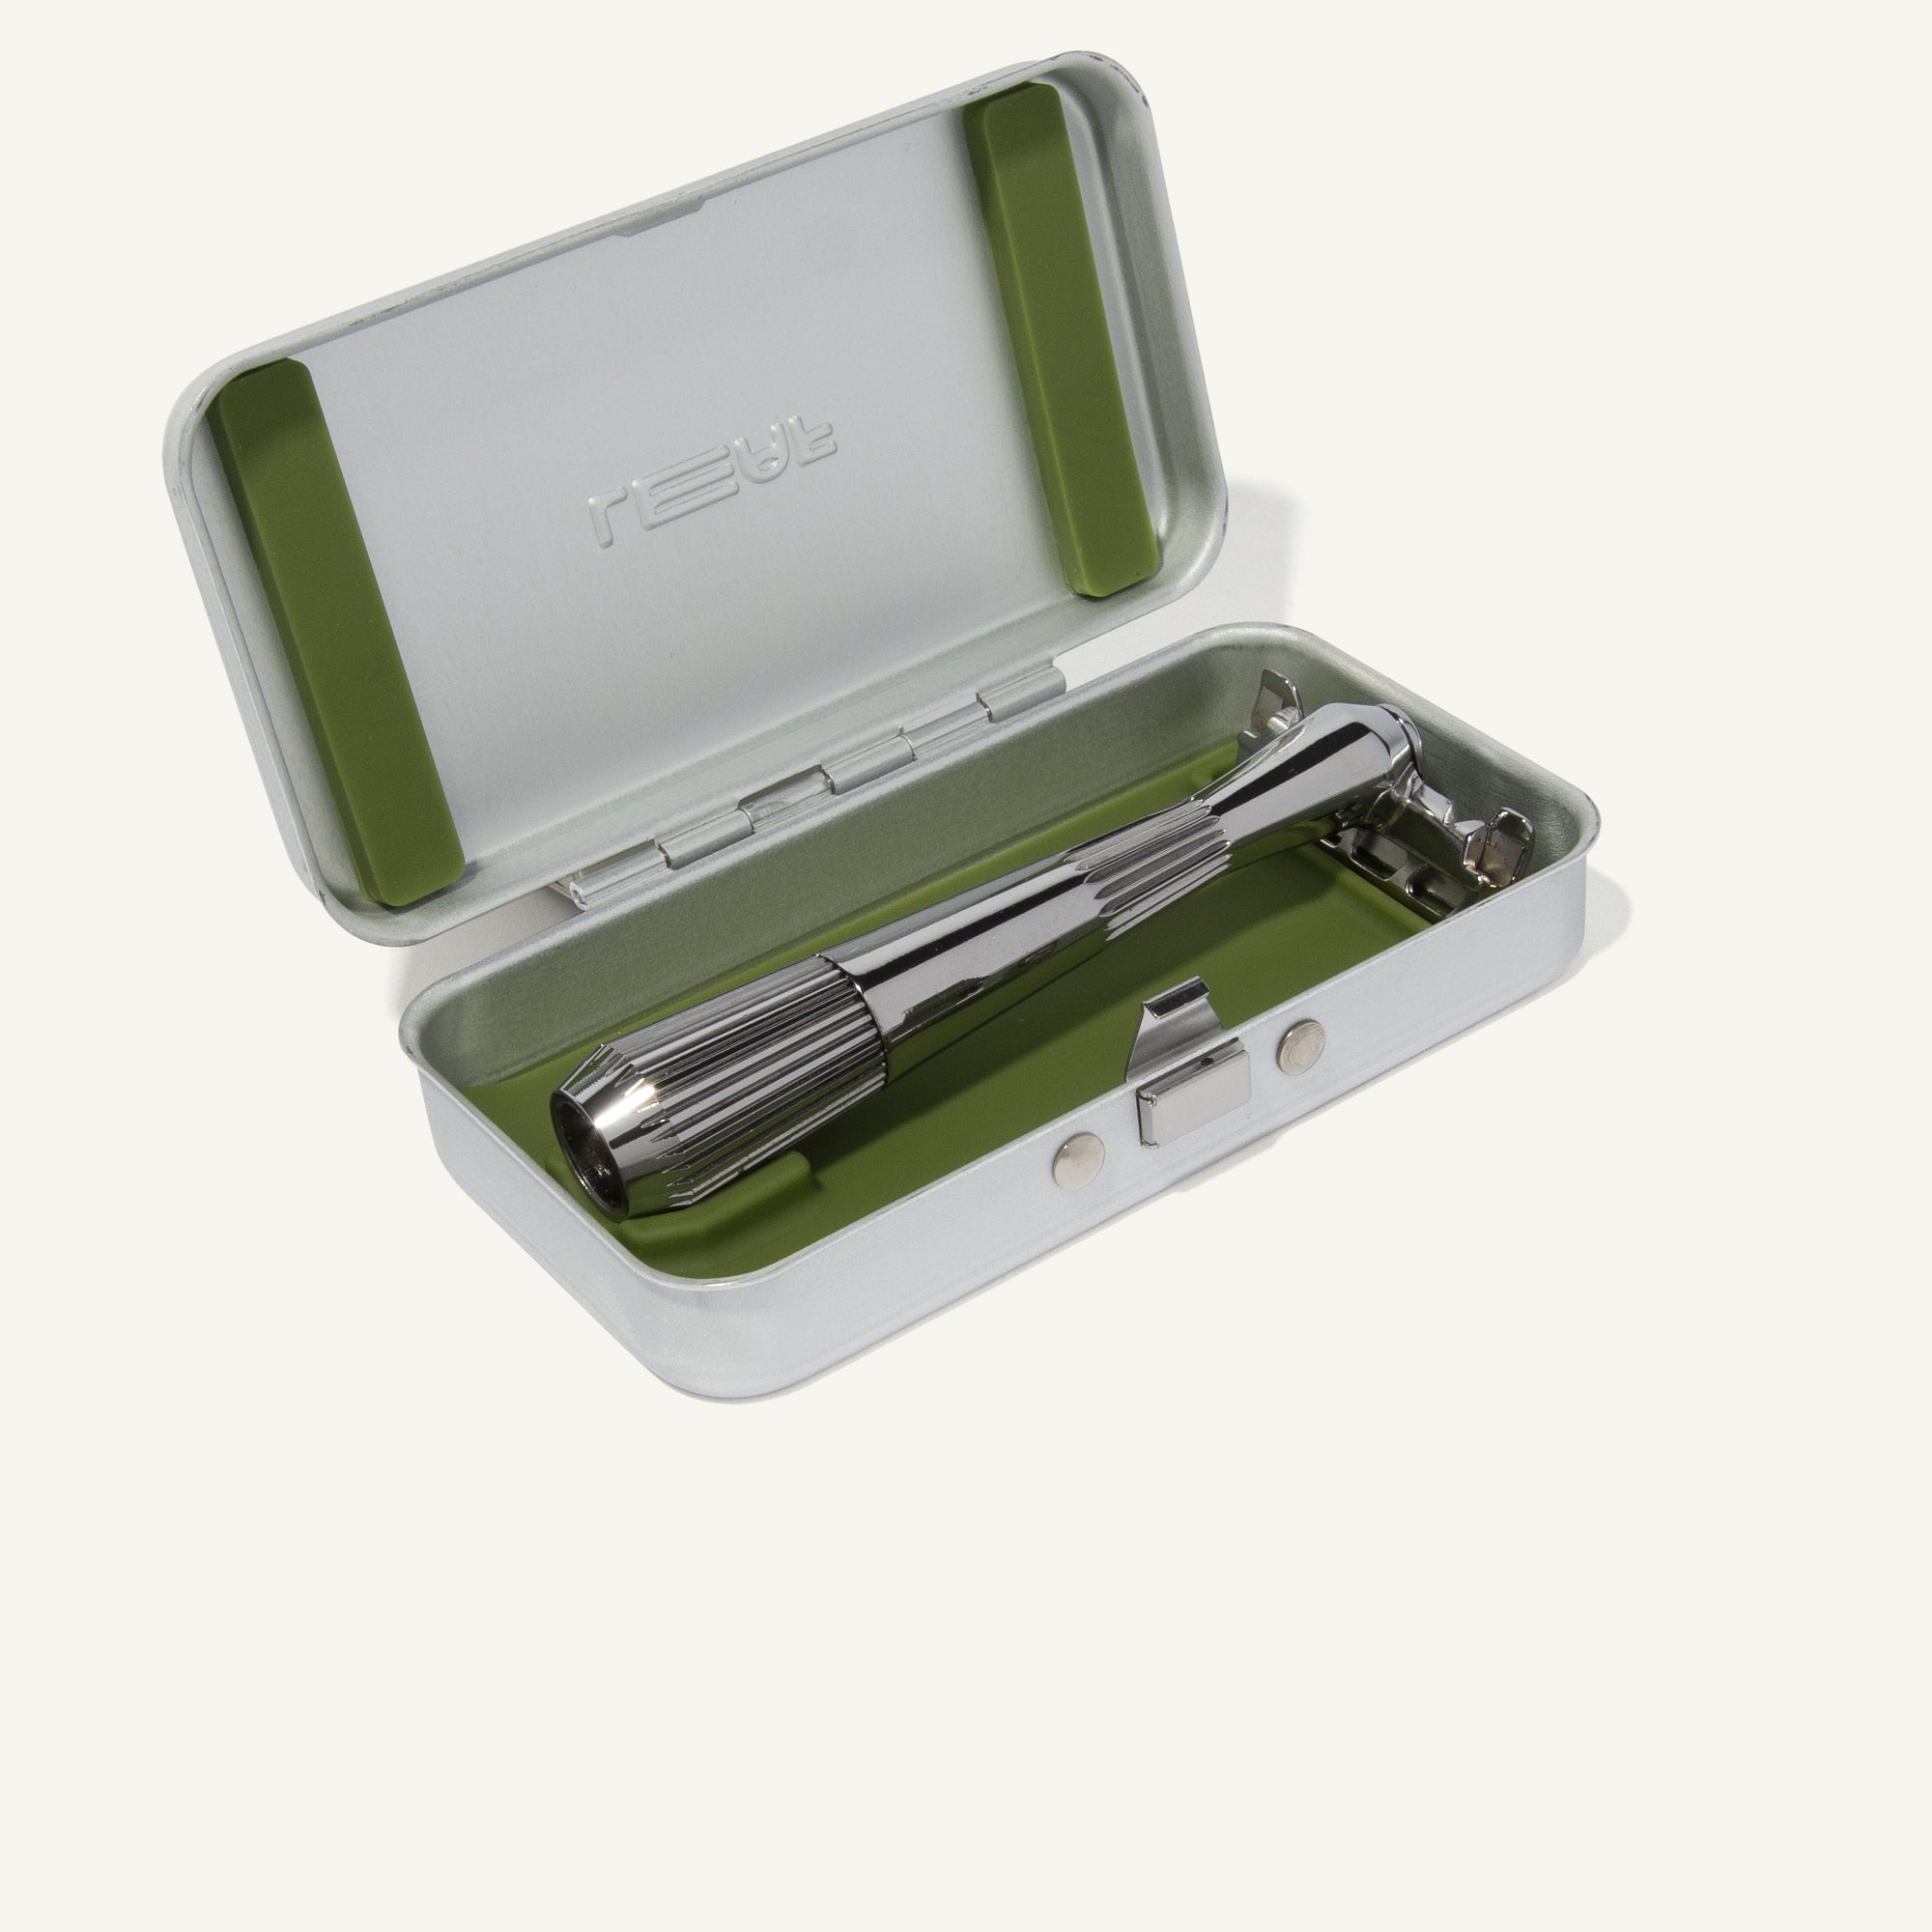 Silver case for the single-edge razors, open with a chrome razor laying inside, on a white background.